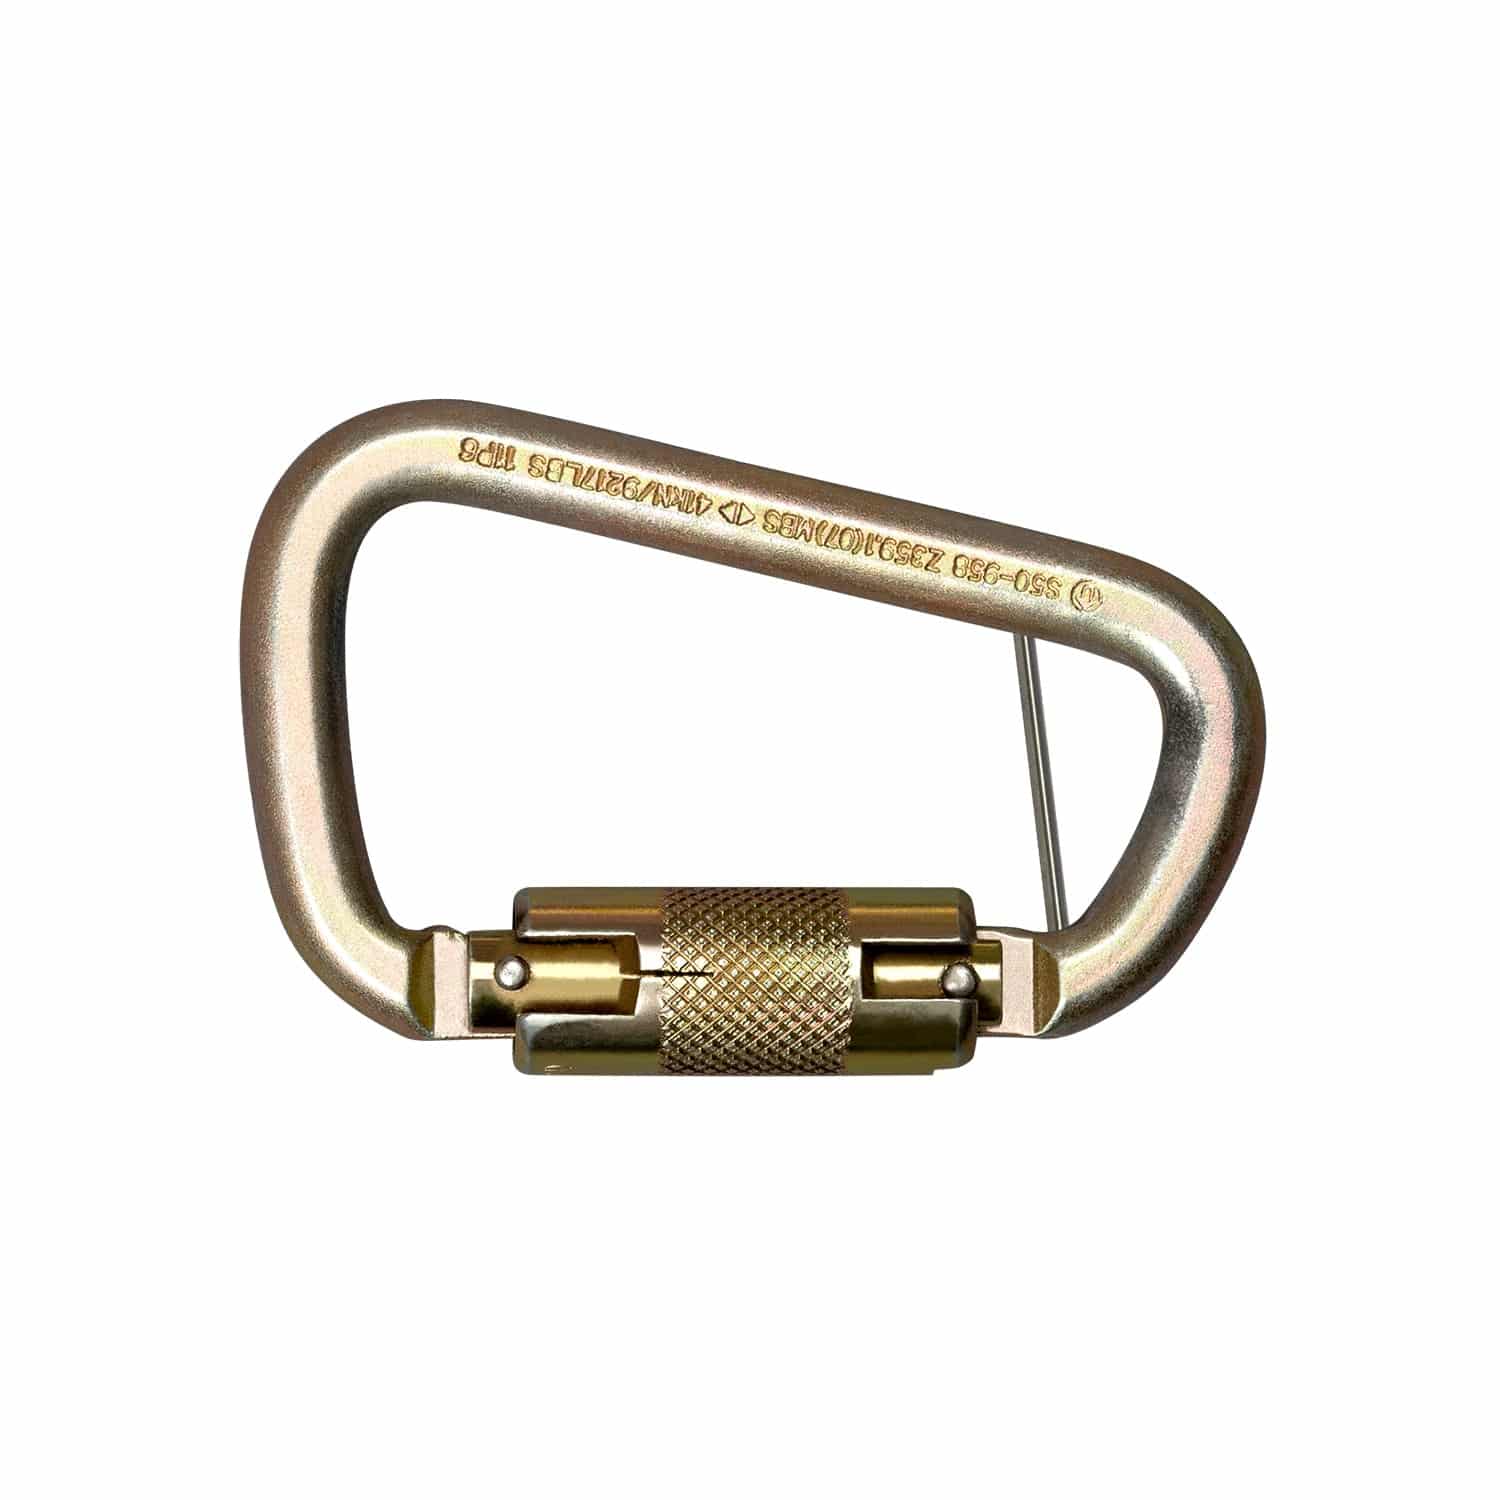 Steel Twist Lock Holes - - 5005T Pin Manufacturing Buckingham with Carabiner Captive